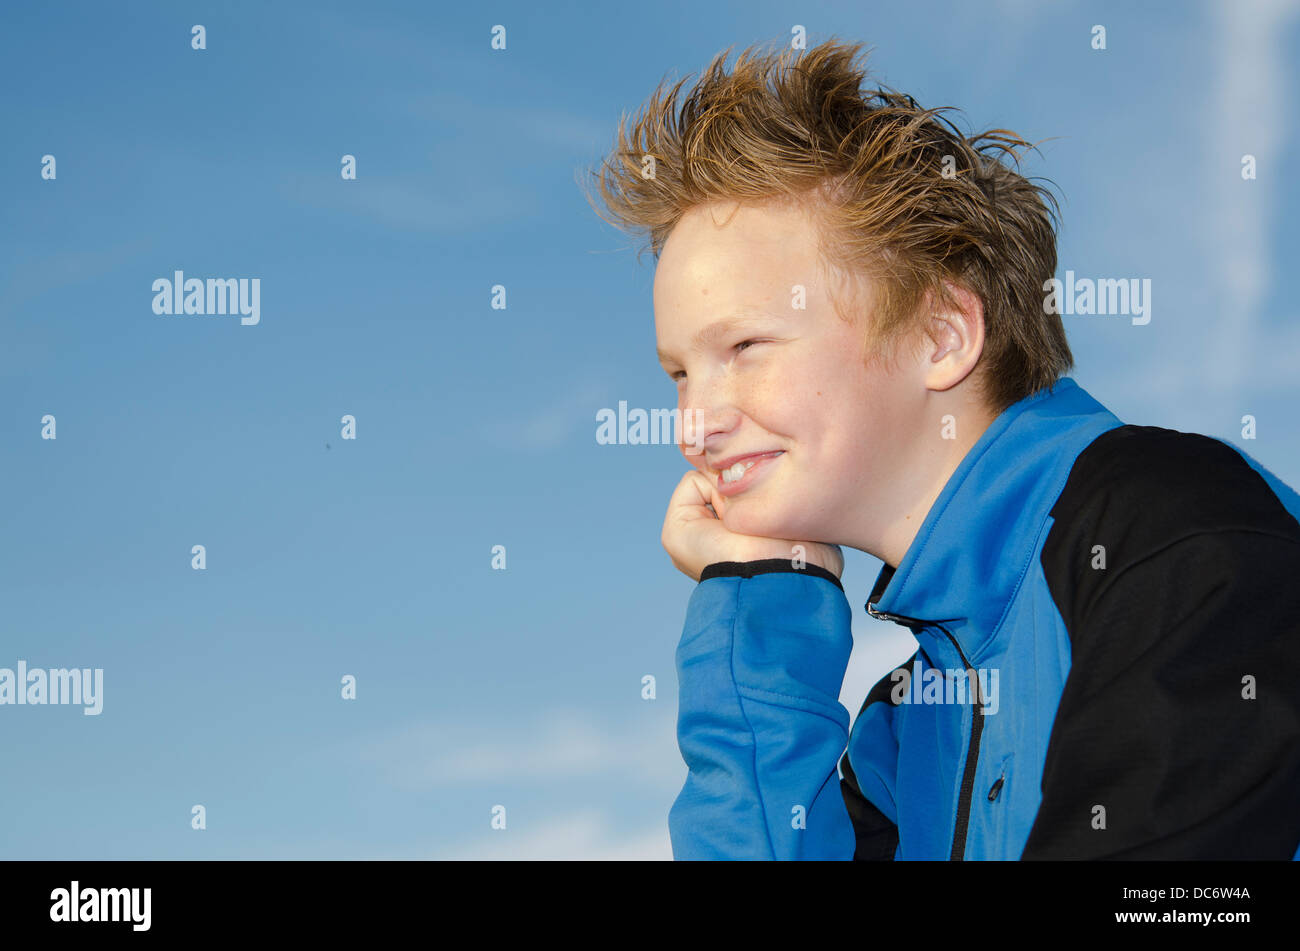 Portrait of guy with spiky hairstyle against blue sky background Stock Photo